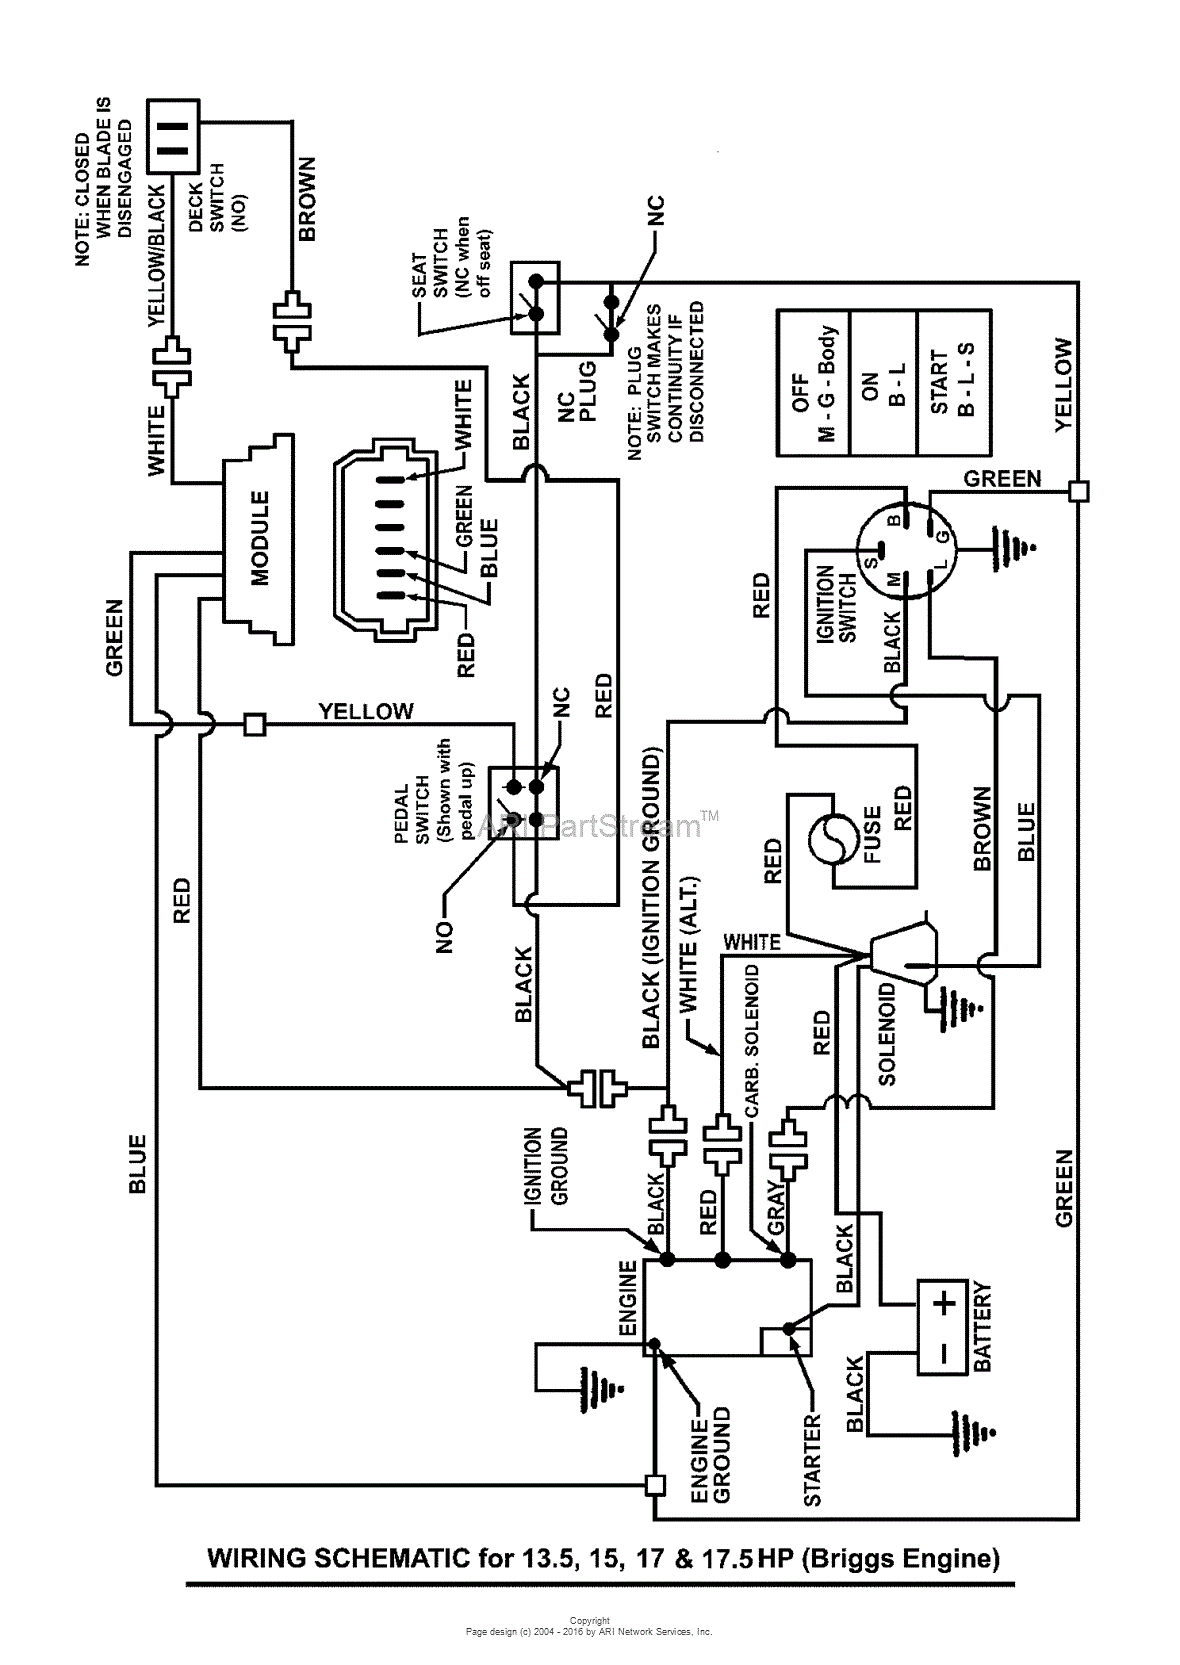 Briggs And Stratton V Twin Wiring Diagram from az417944.vo.msecnd.net